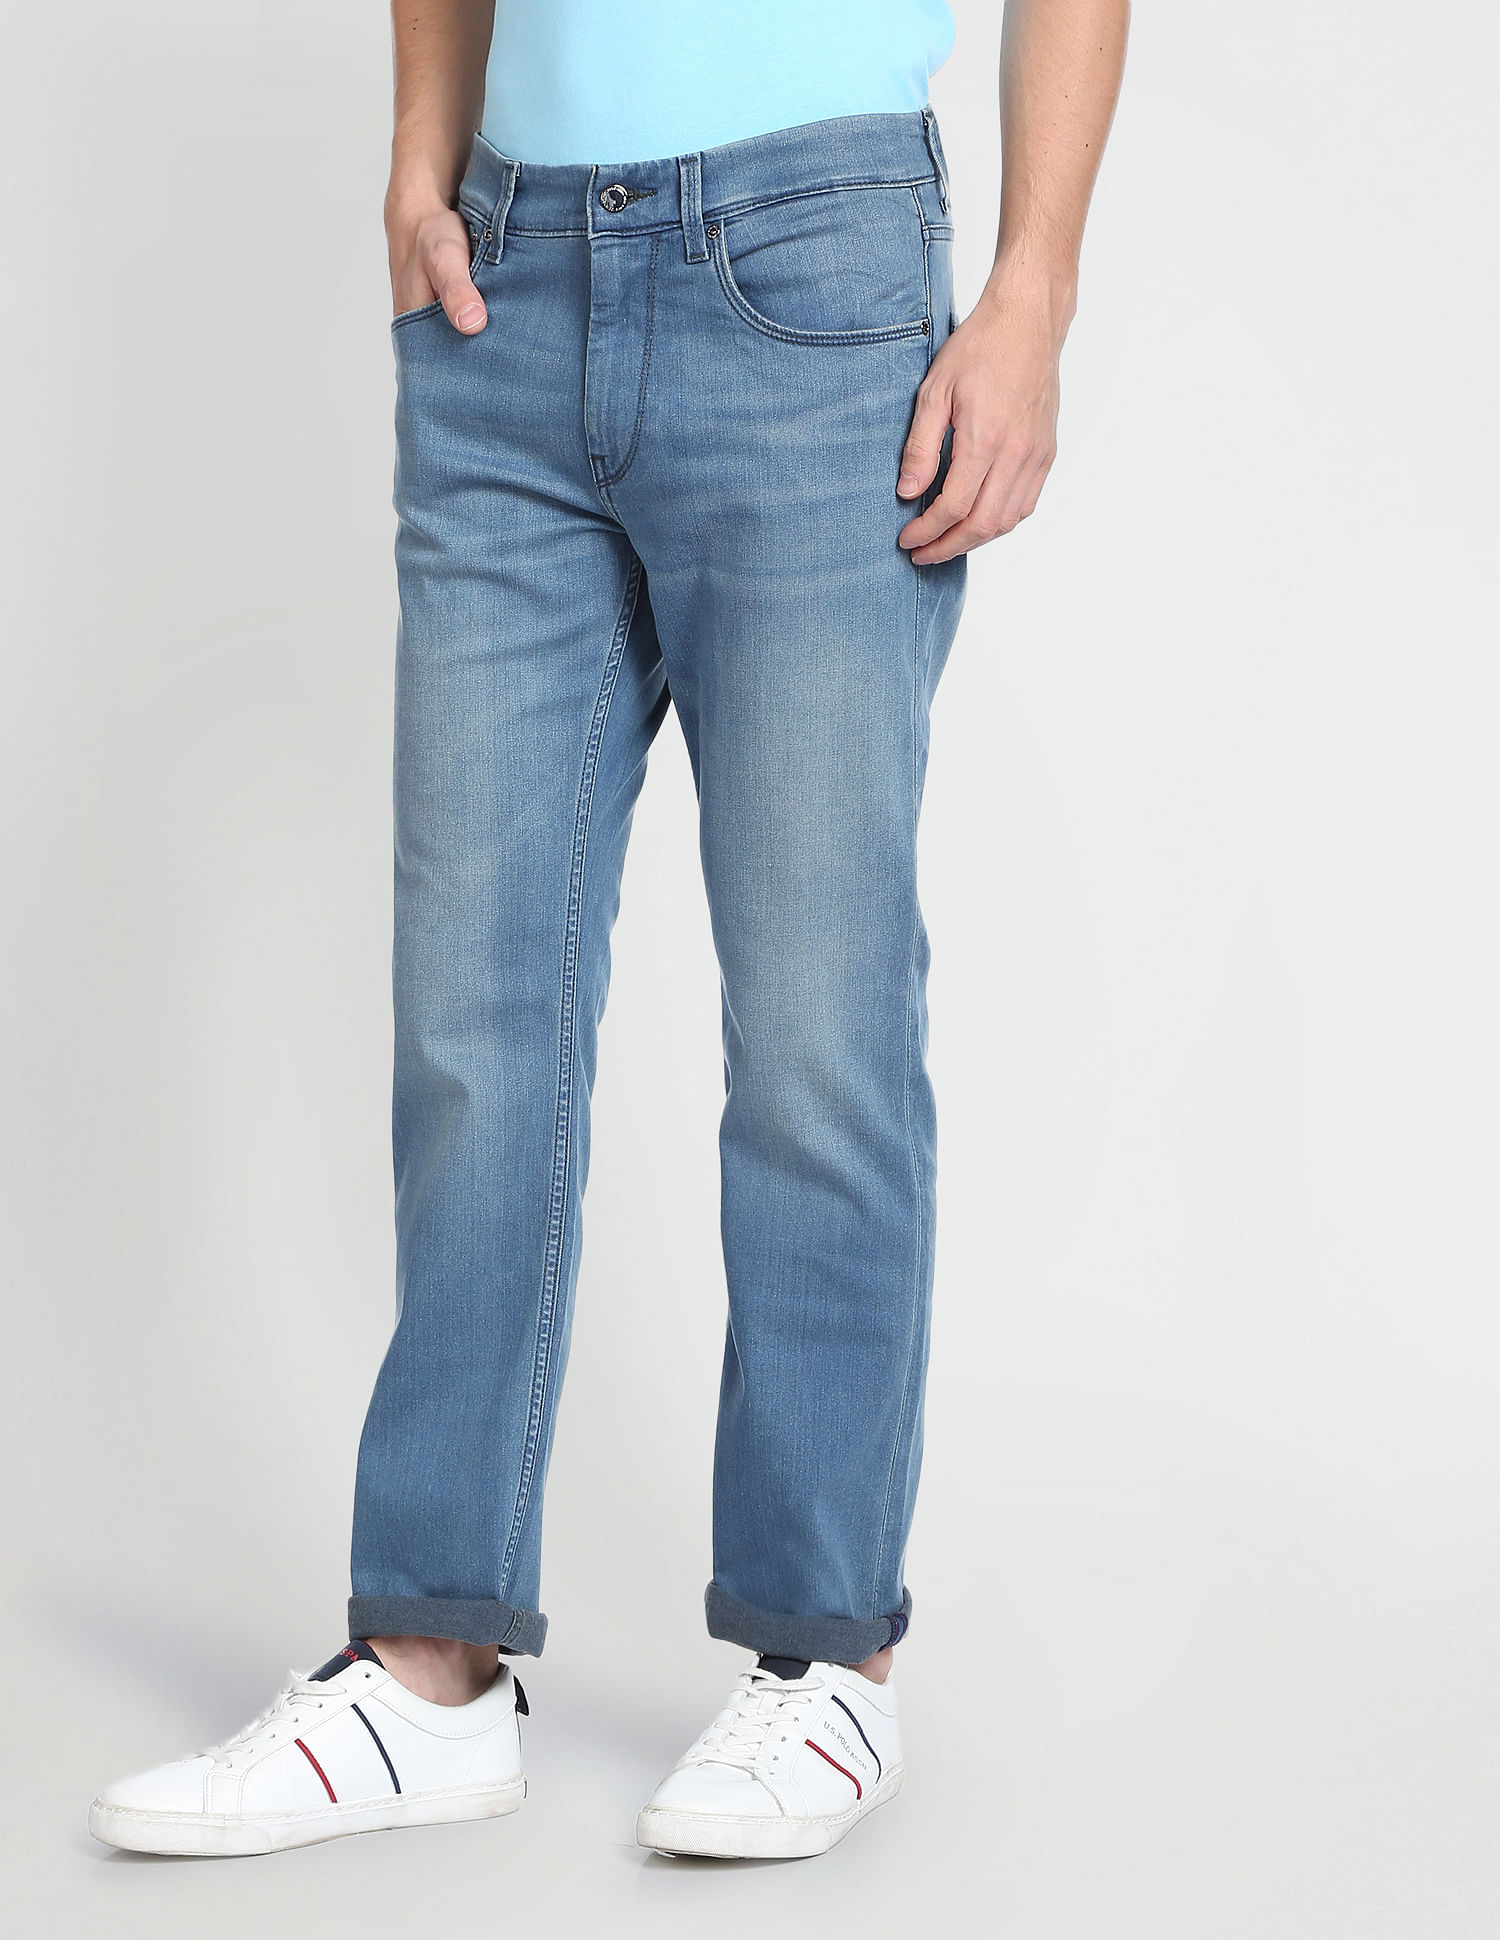 Mens Blue Denim Jeans Manufacturers In South Extension, Keyword2 Suppliers  South Extension